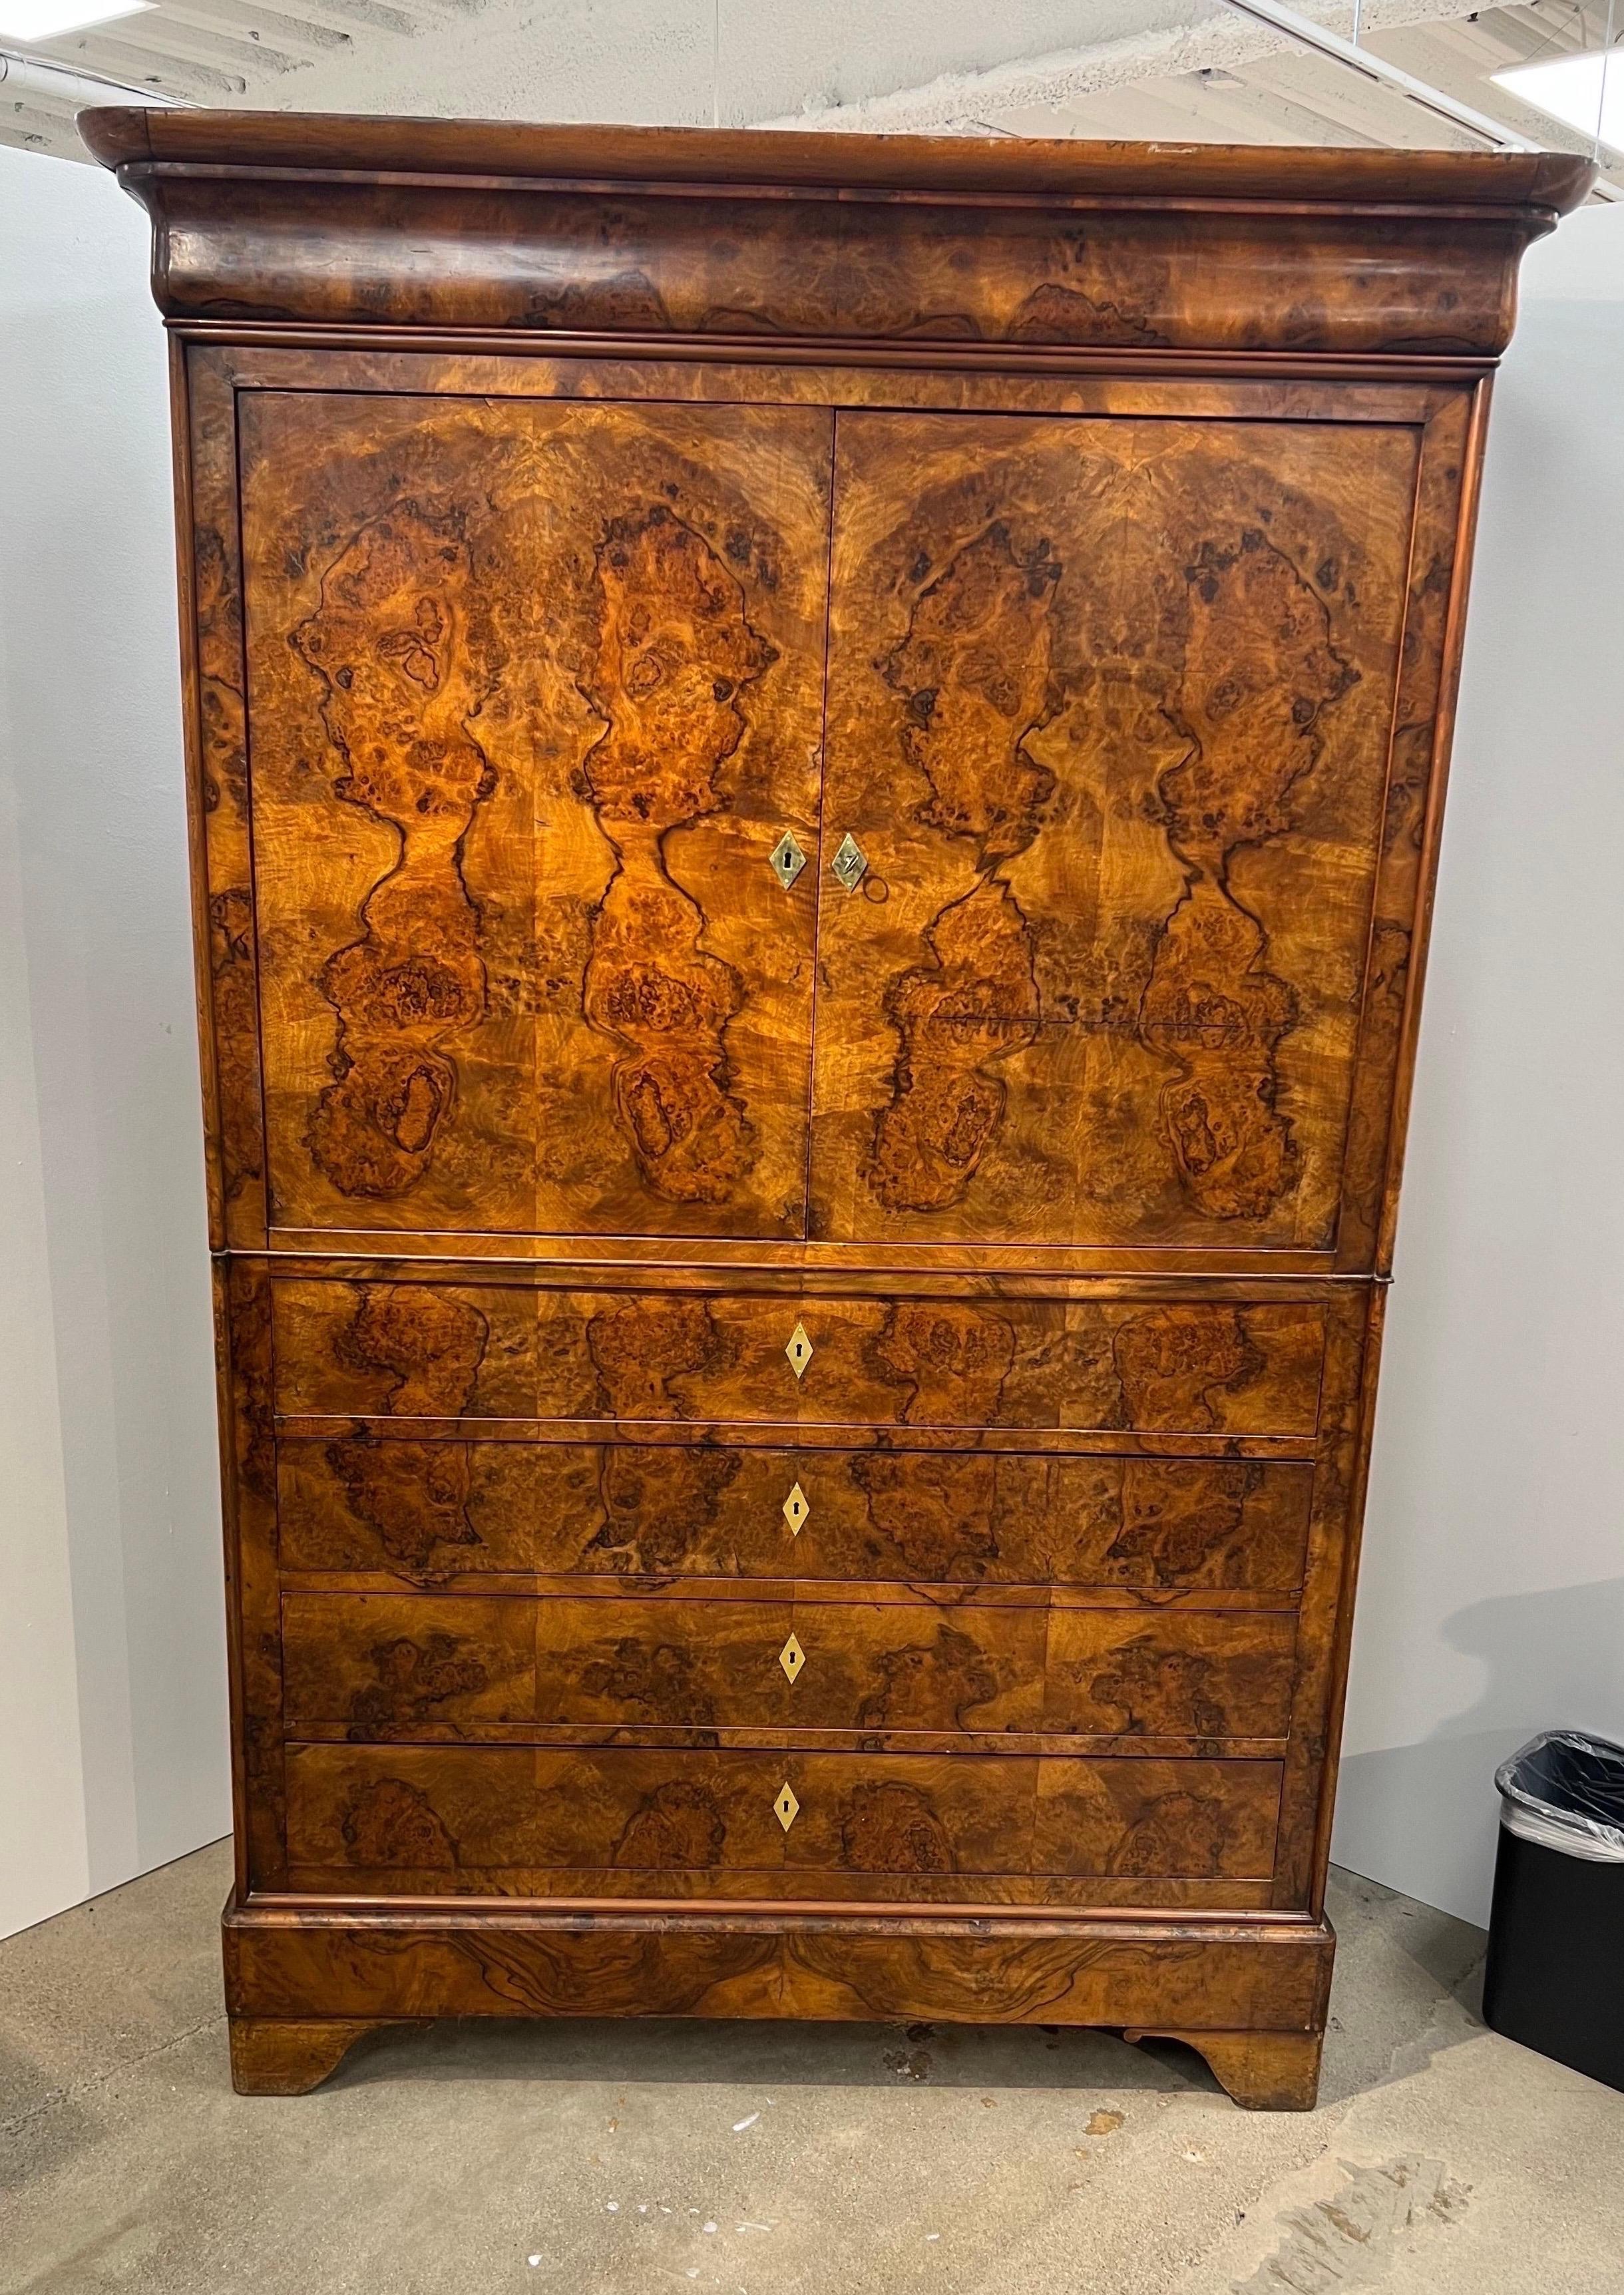 What a beauty! This fabulous and rare French 19th century burl walnut linen press is as easy on the eyes as it gets. It’s very uncommon to find linen presses made in France (the land of armoires). This oversized stunner shows the French attempt at